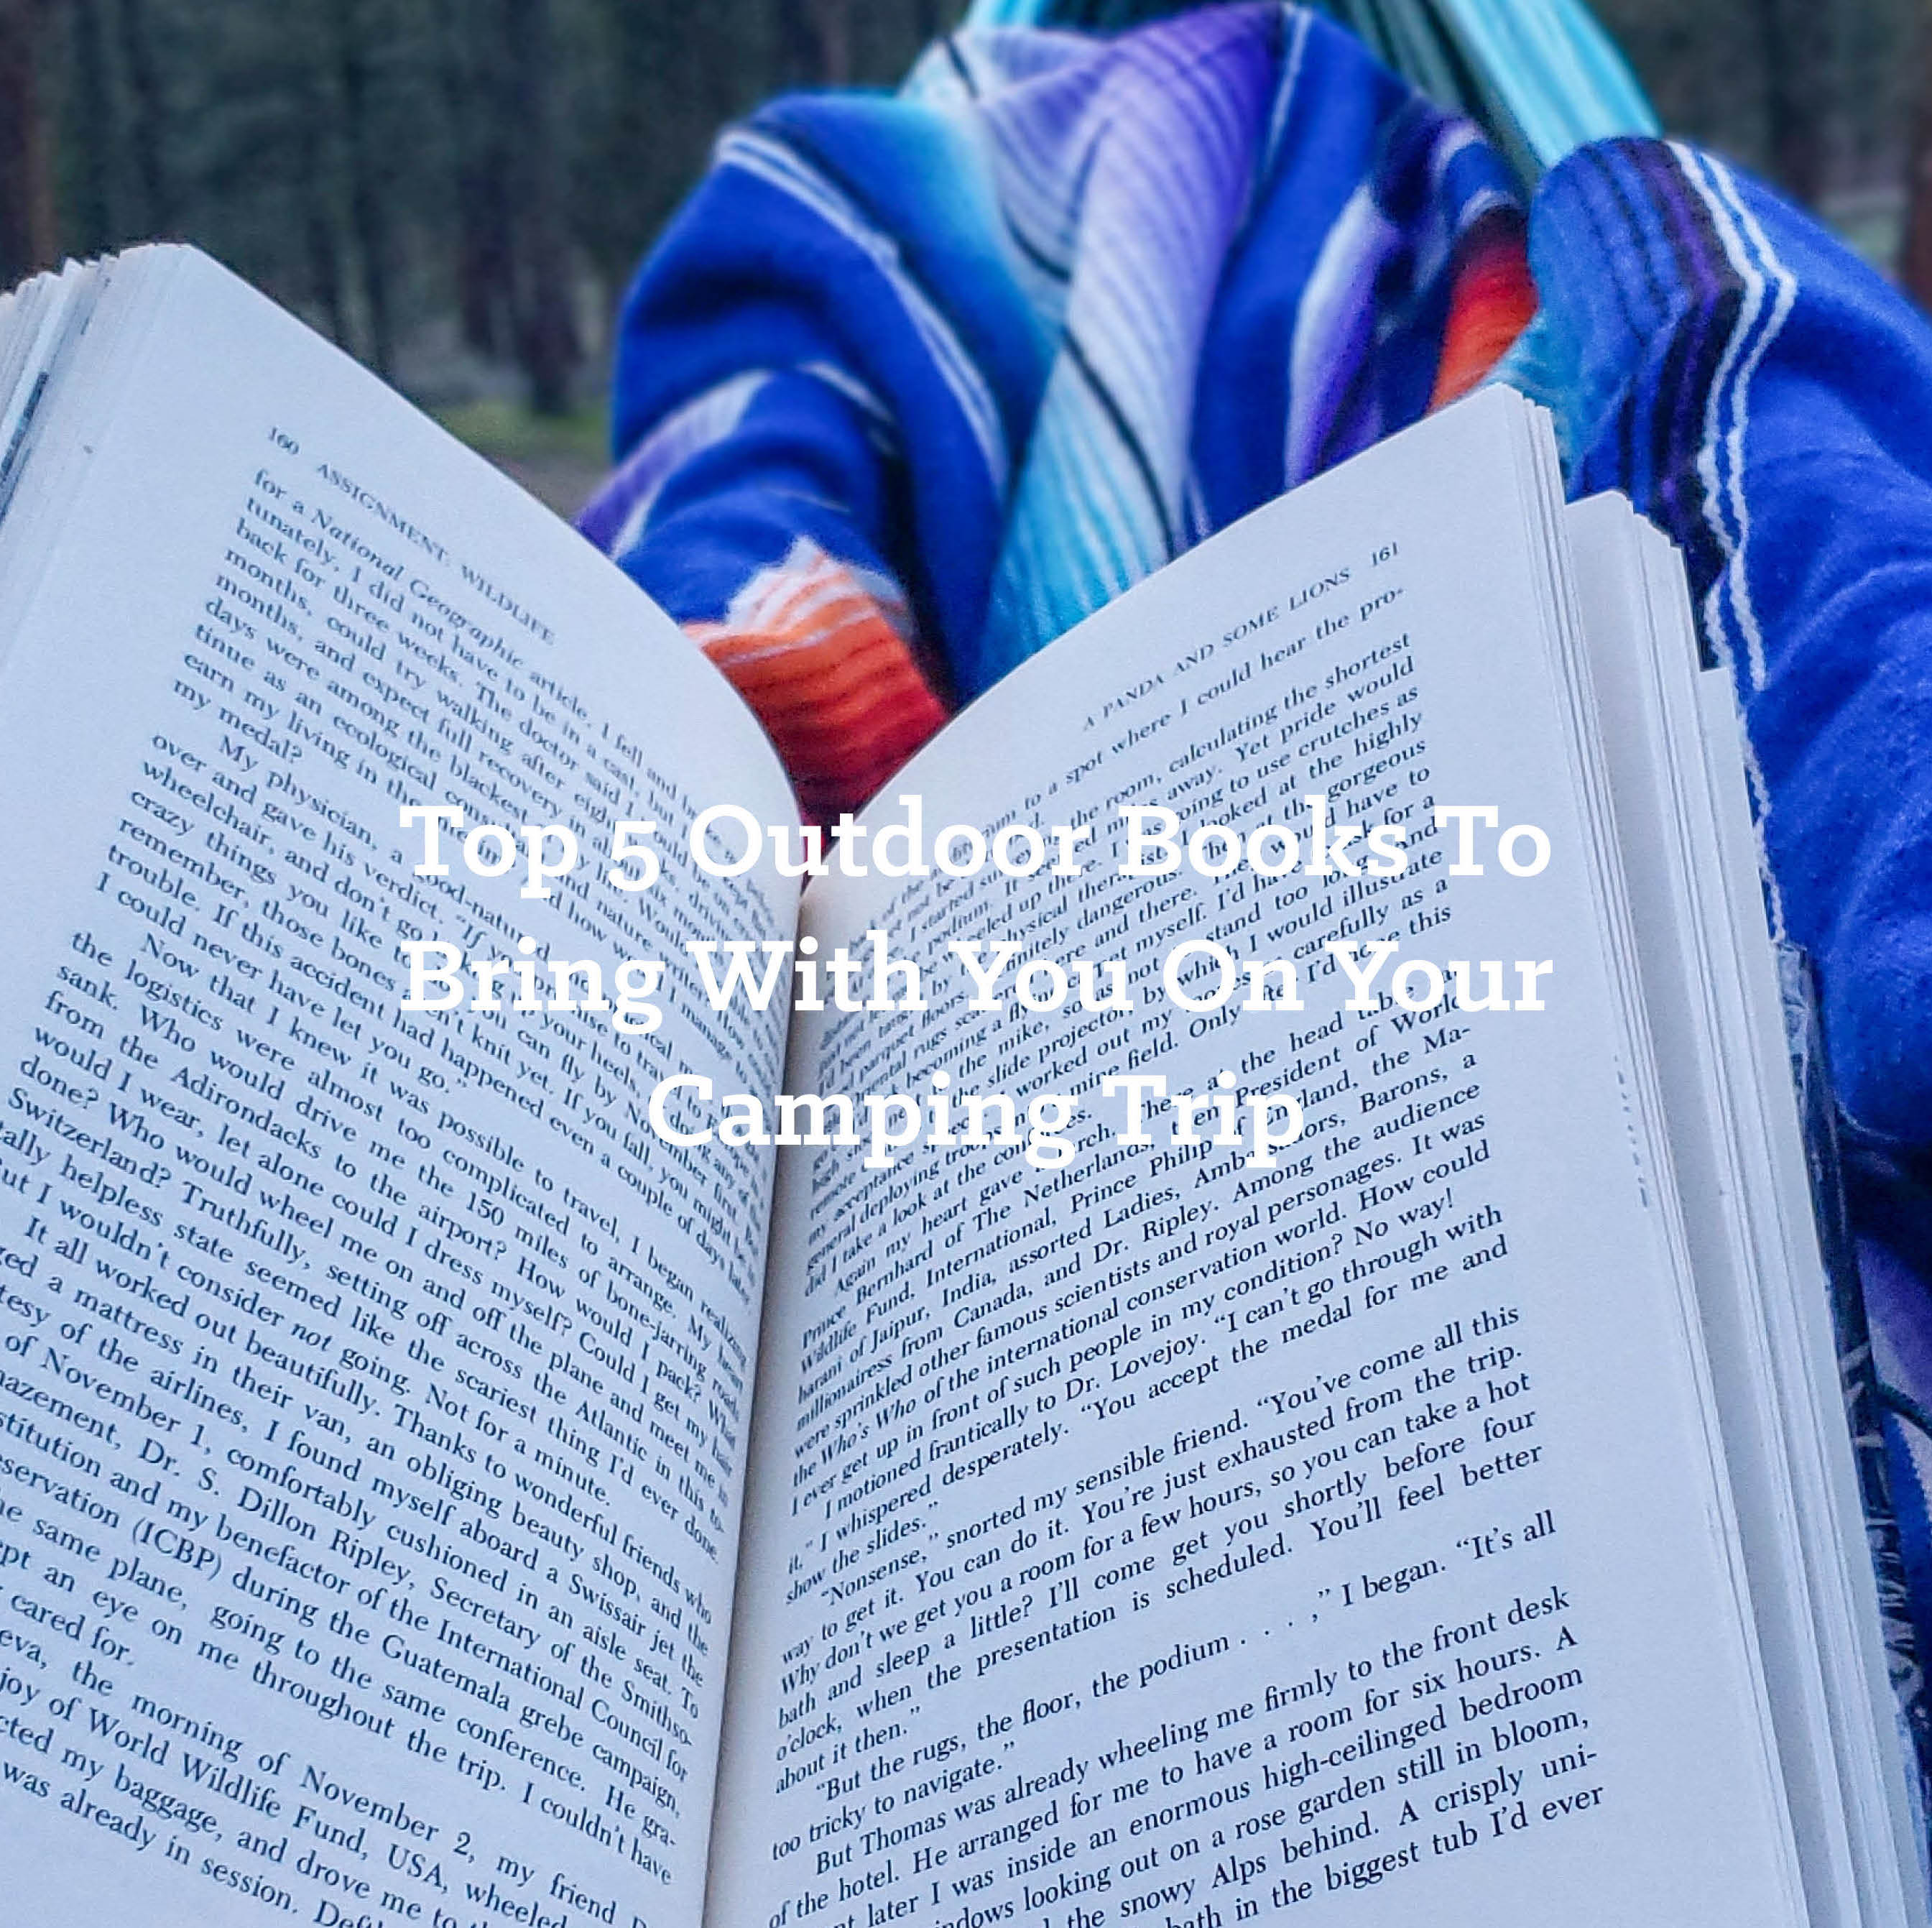 Top 5 Outdoor Books To Bring With You On Your Camping Trip